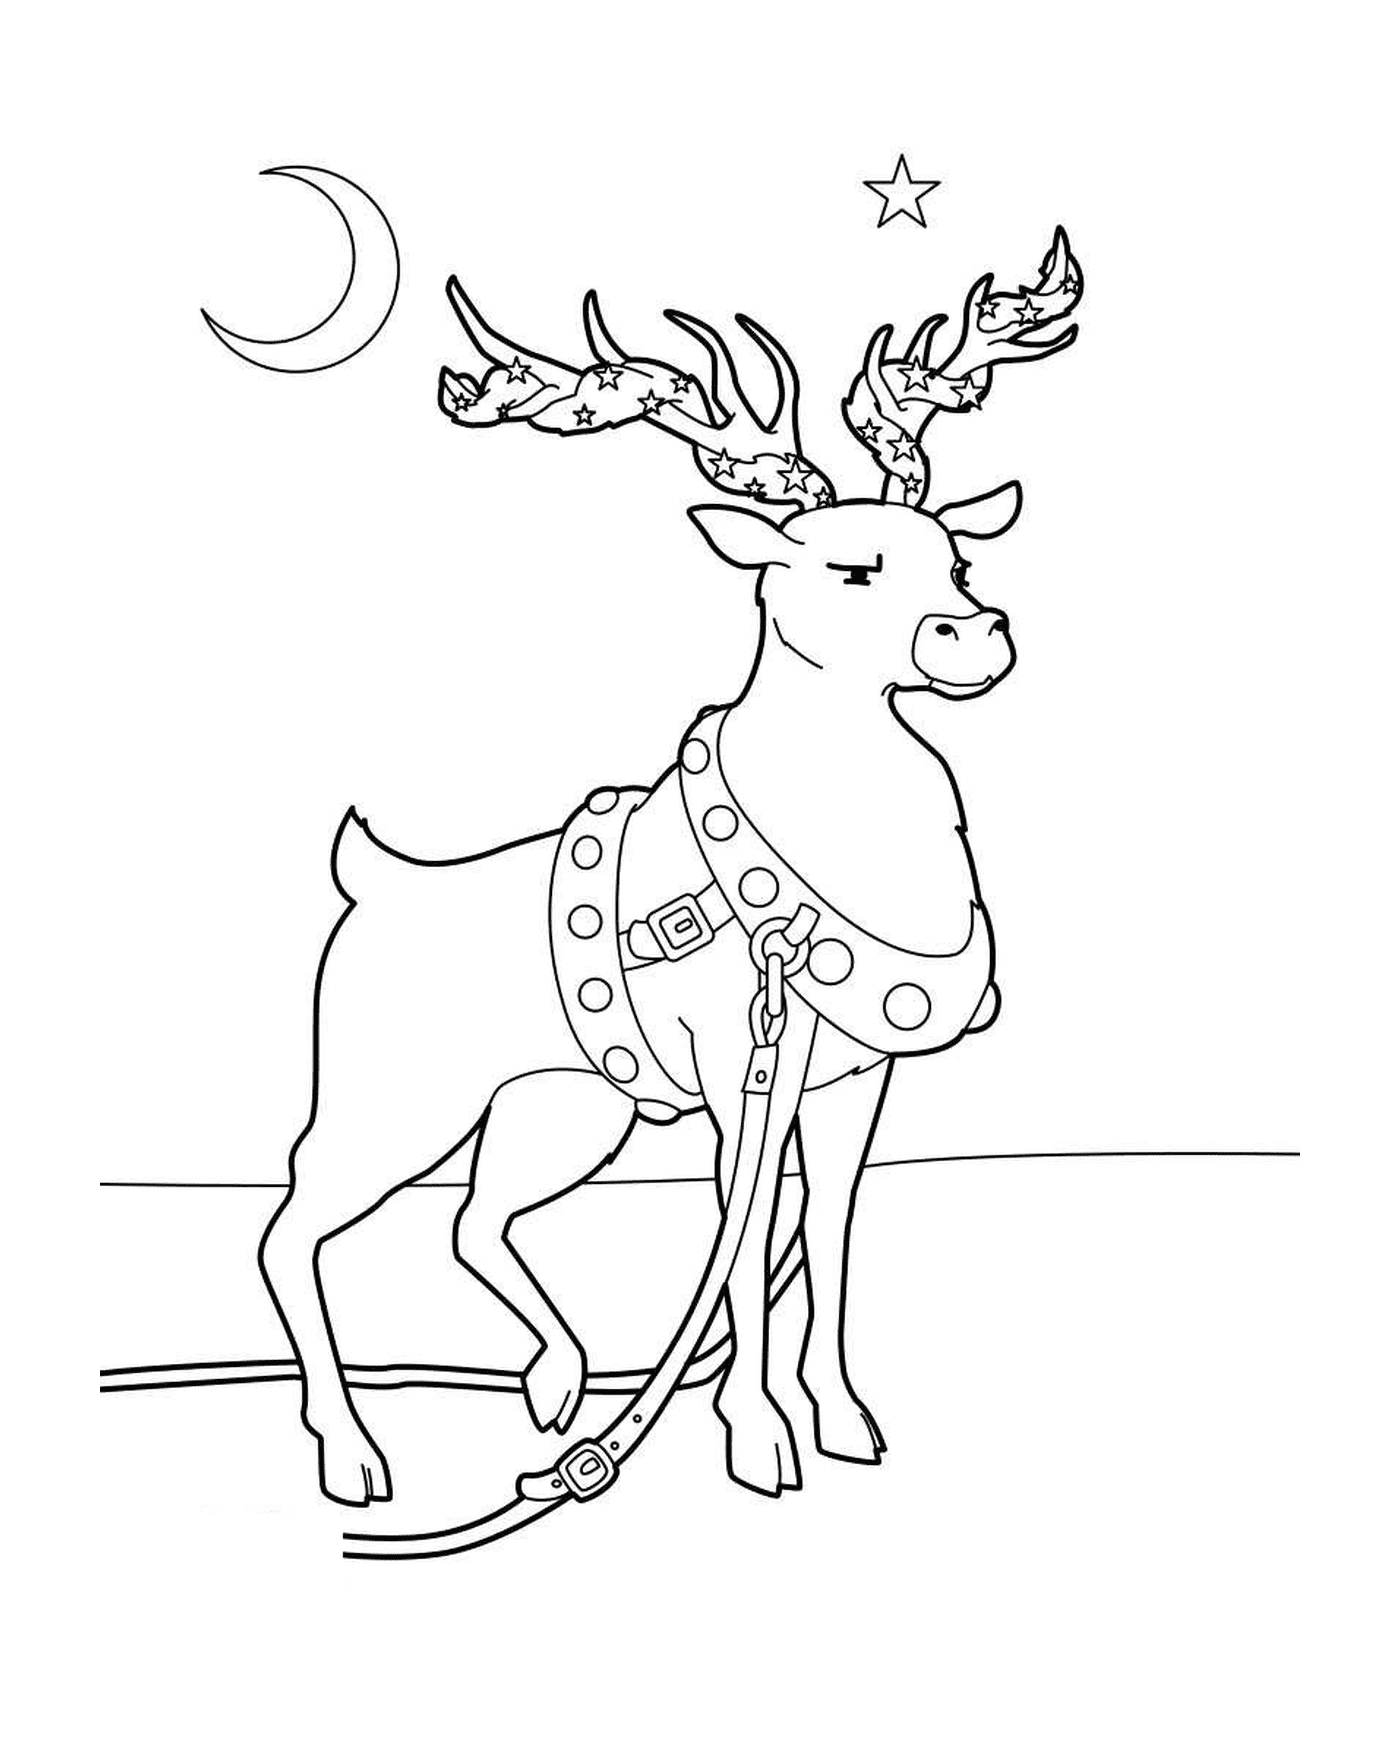  Furie, the most powerful of eight reindeer 